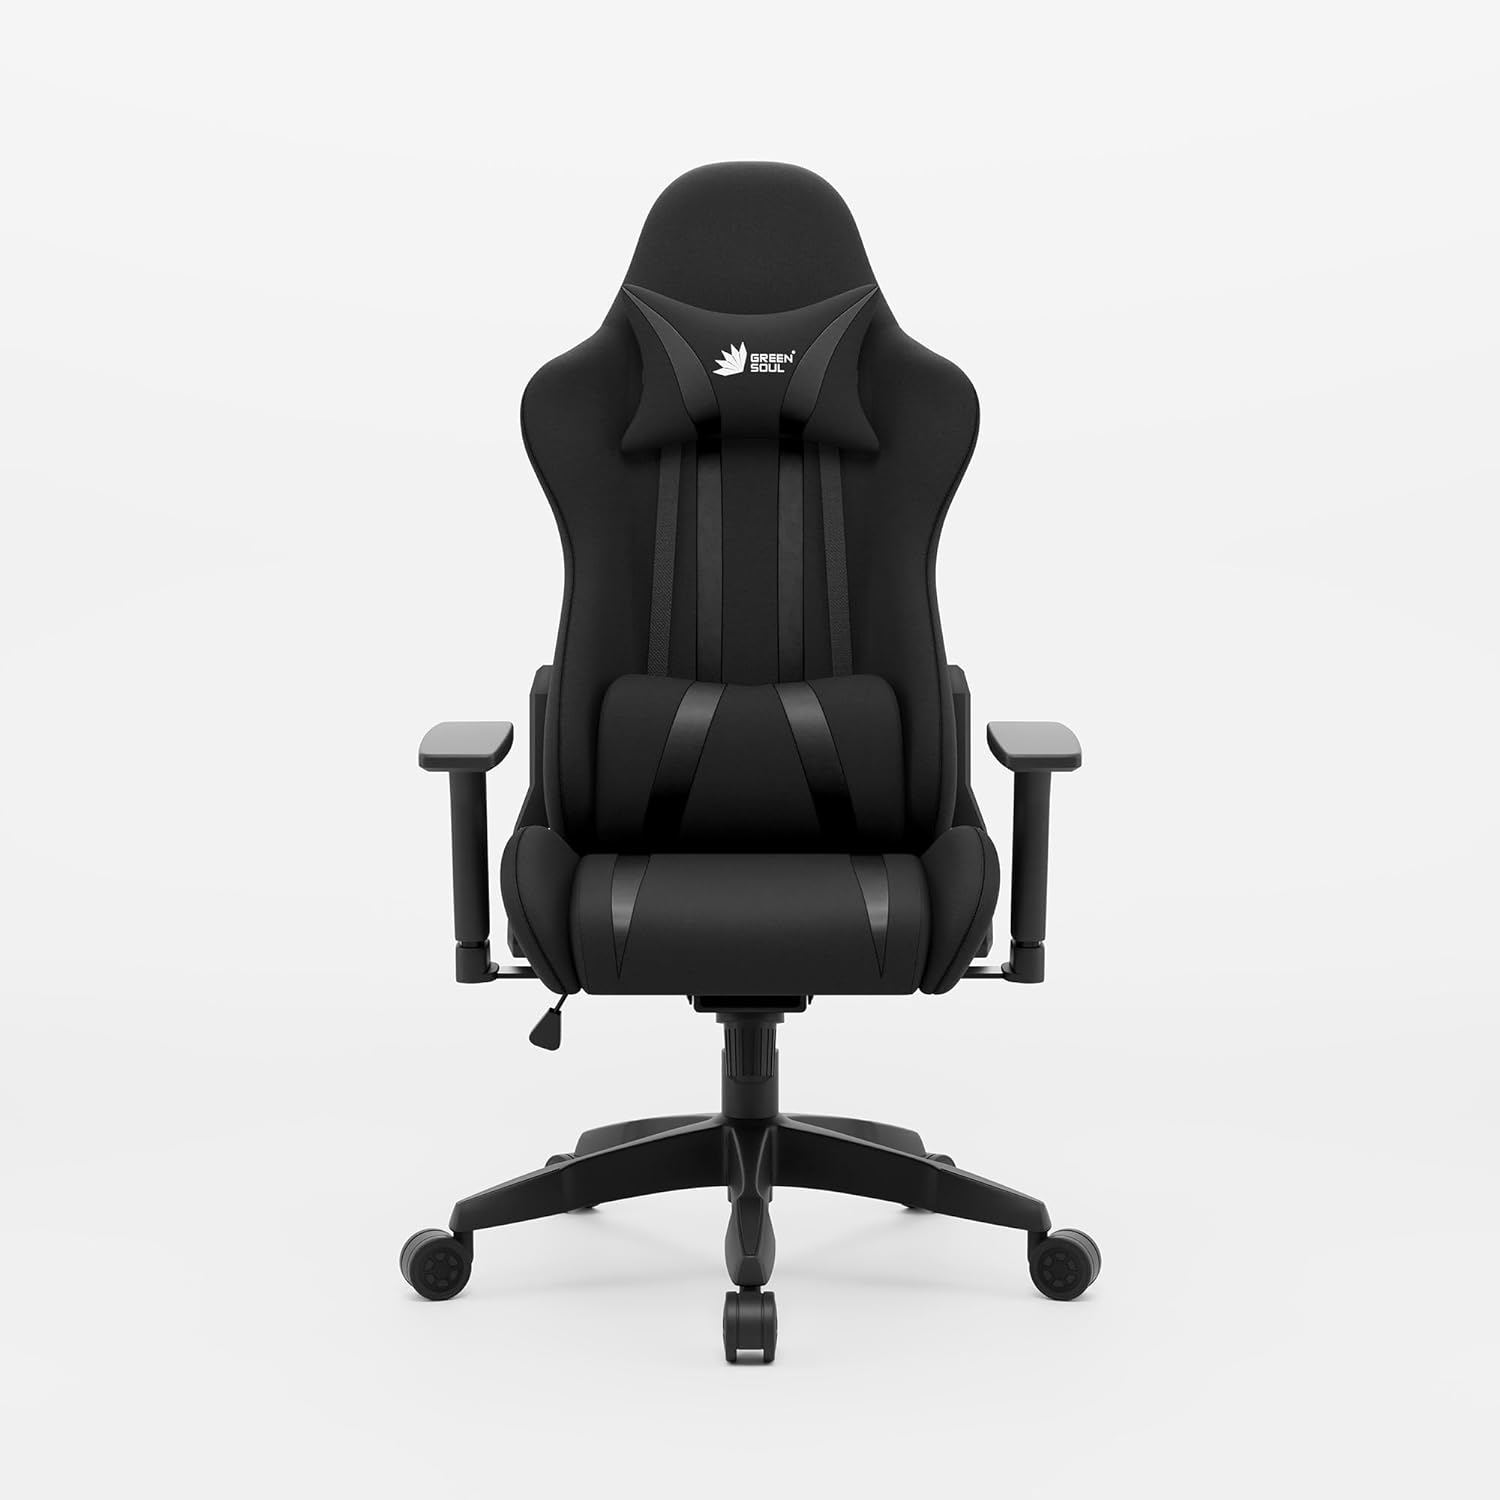 Best Gaming Chair Under 20000 in India